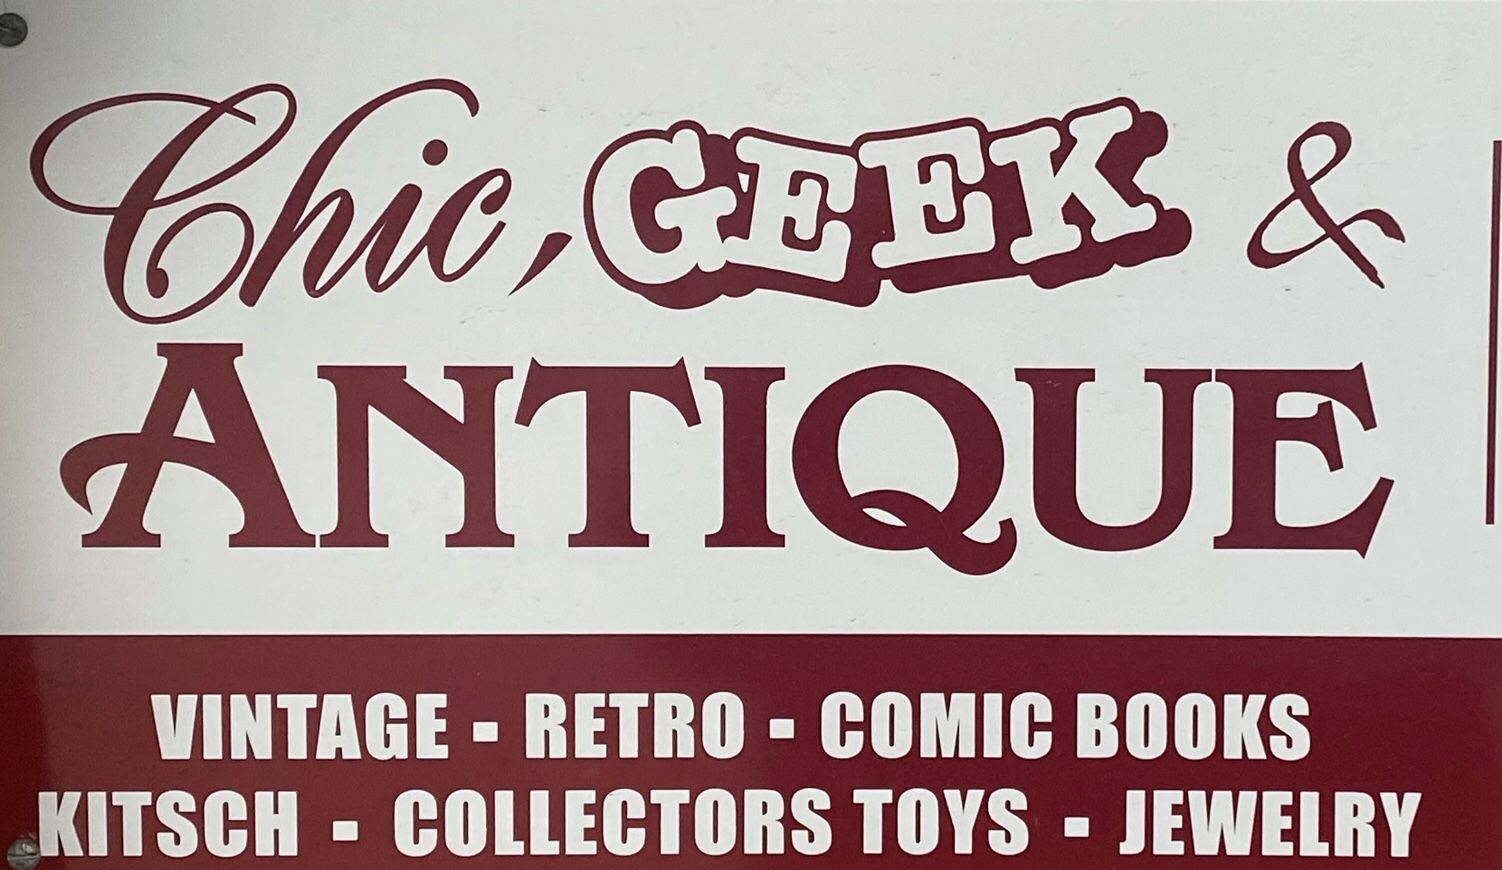 Chic, Geek & Antique is open Monday from 10 a.m. to 7 p.m. Wednesday to Saturday from 10 a.m. to 7 p.m., and Sunday from 12 to 7 p.m. For information visit their Facebook page.